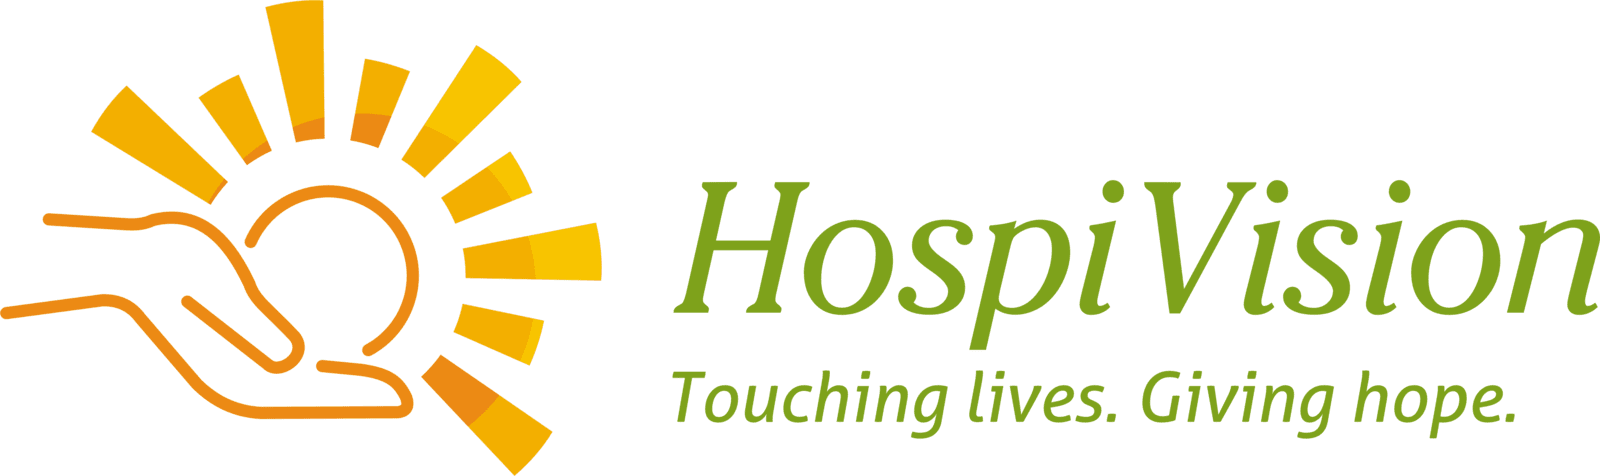 HospiVision - Touching lives. Giving hope.